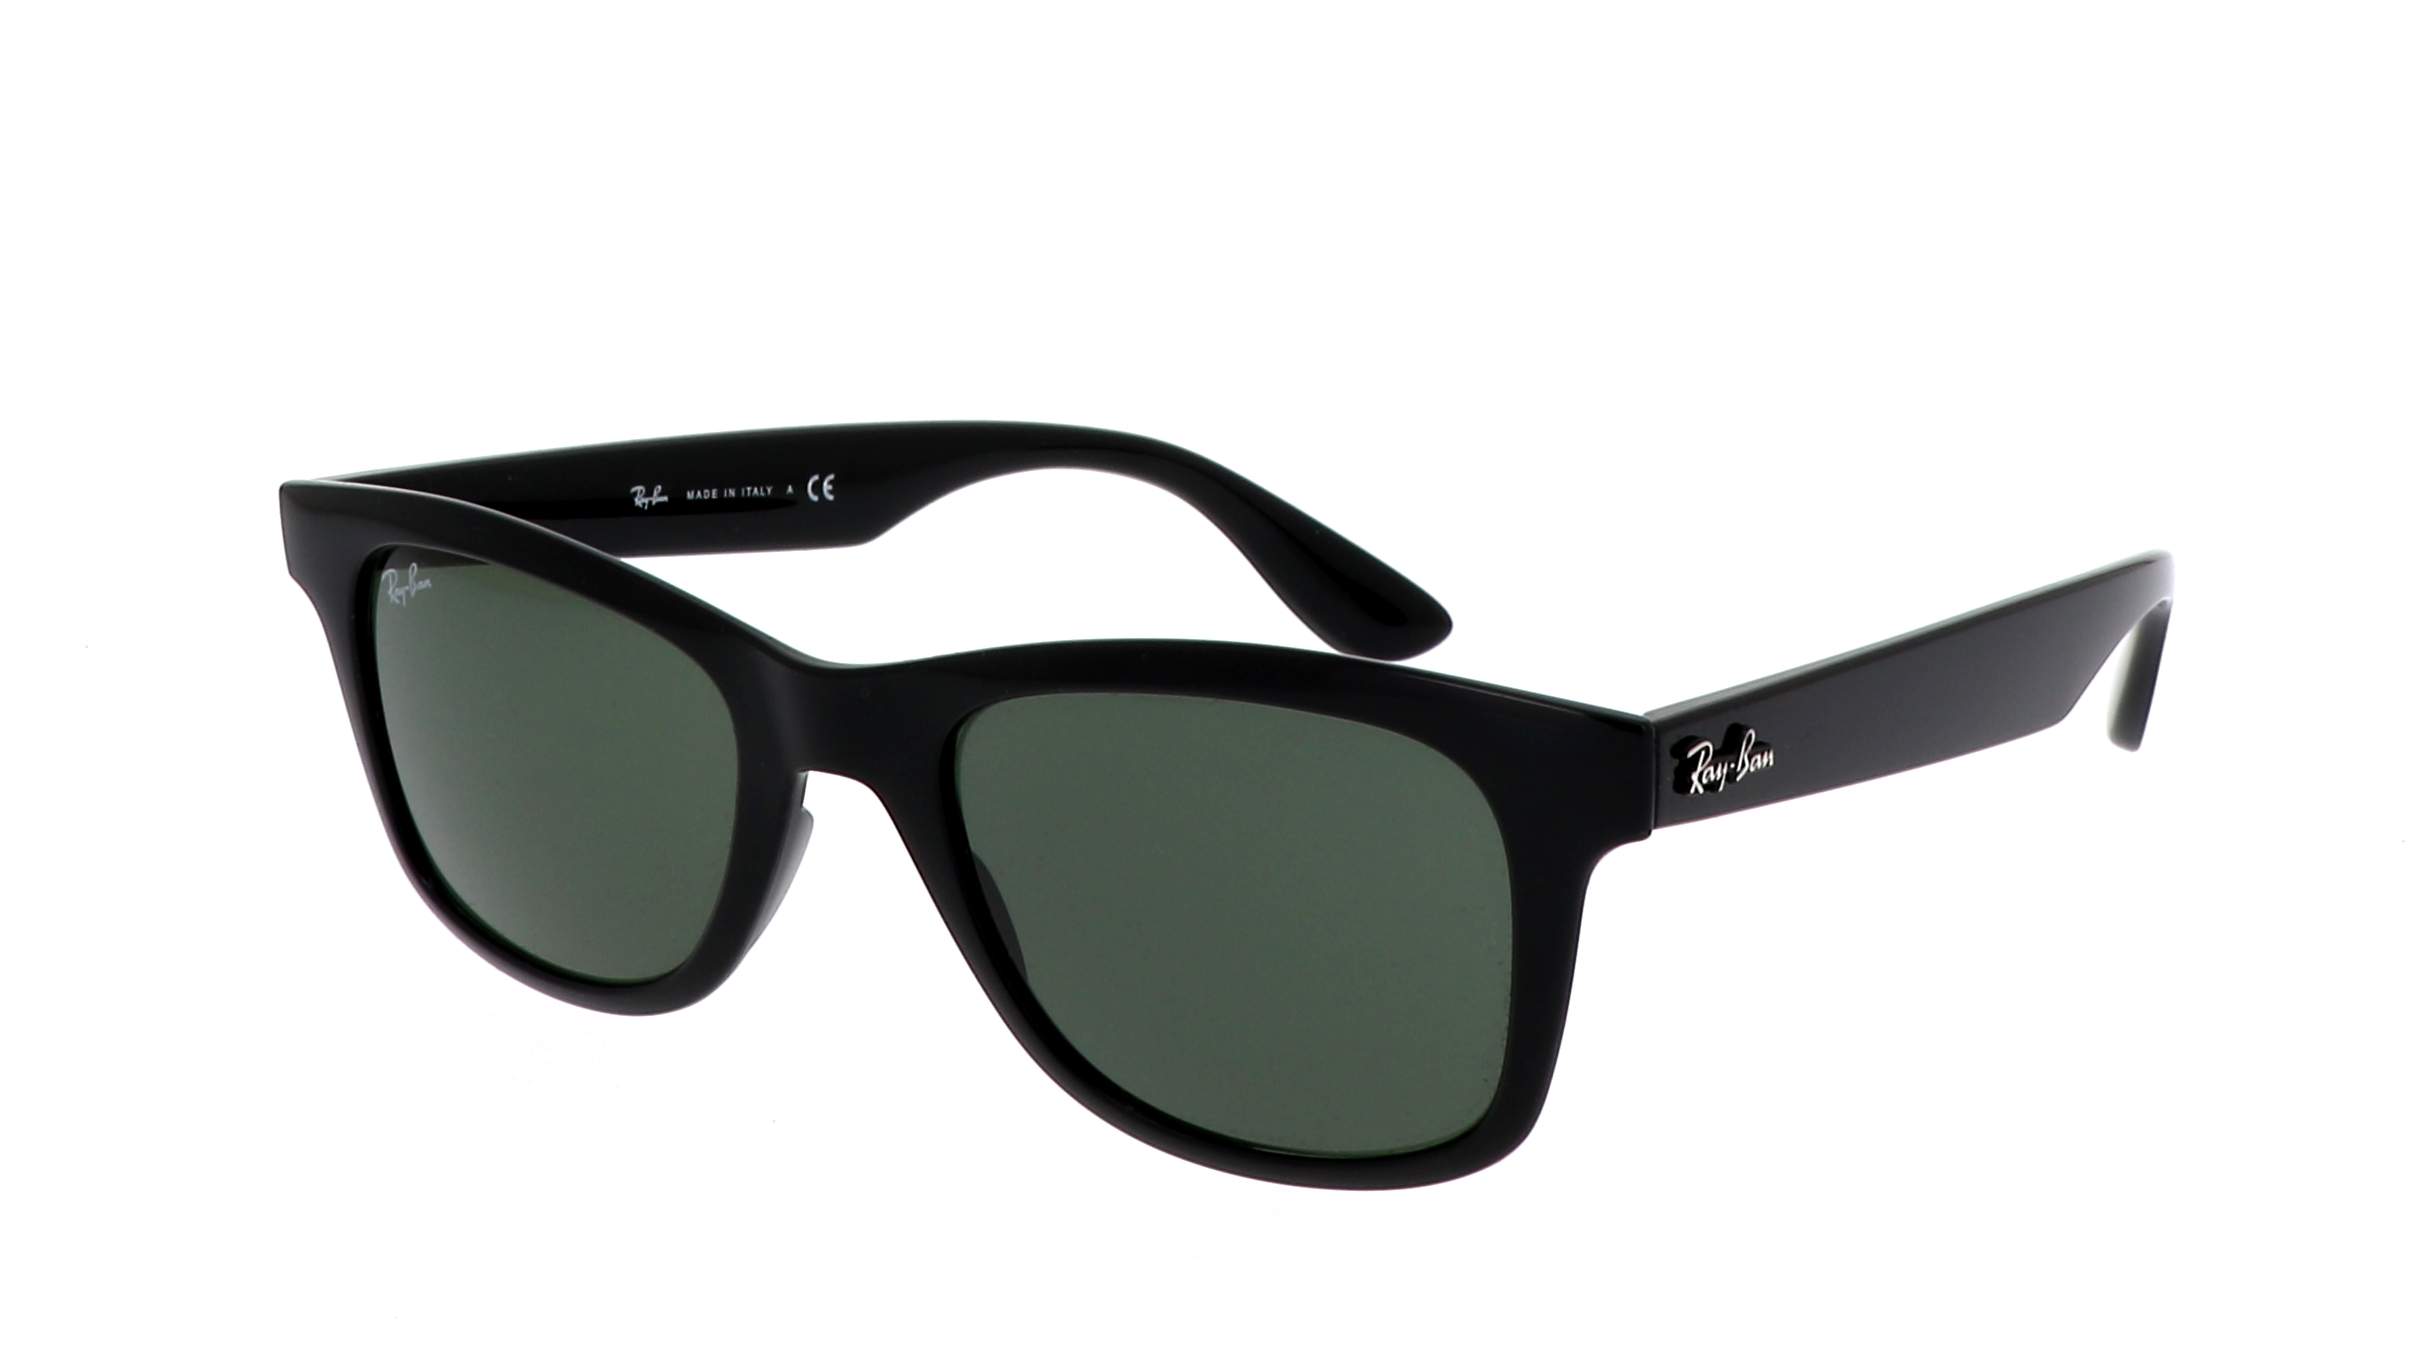 black and white raybans